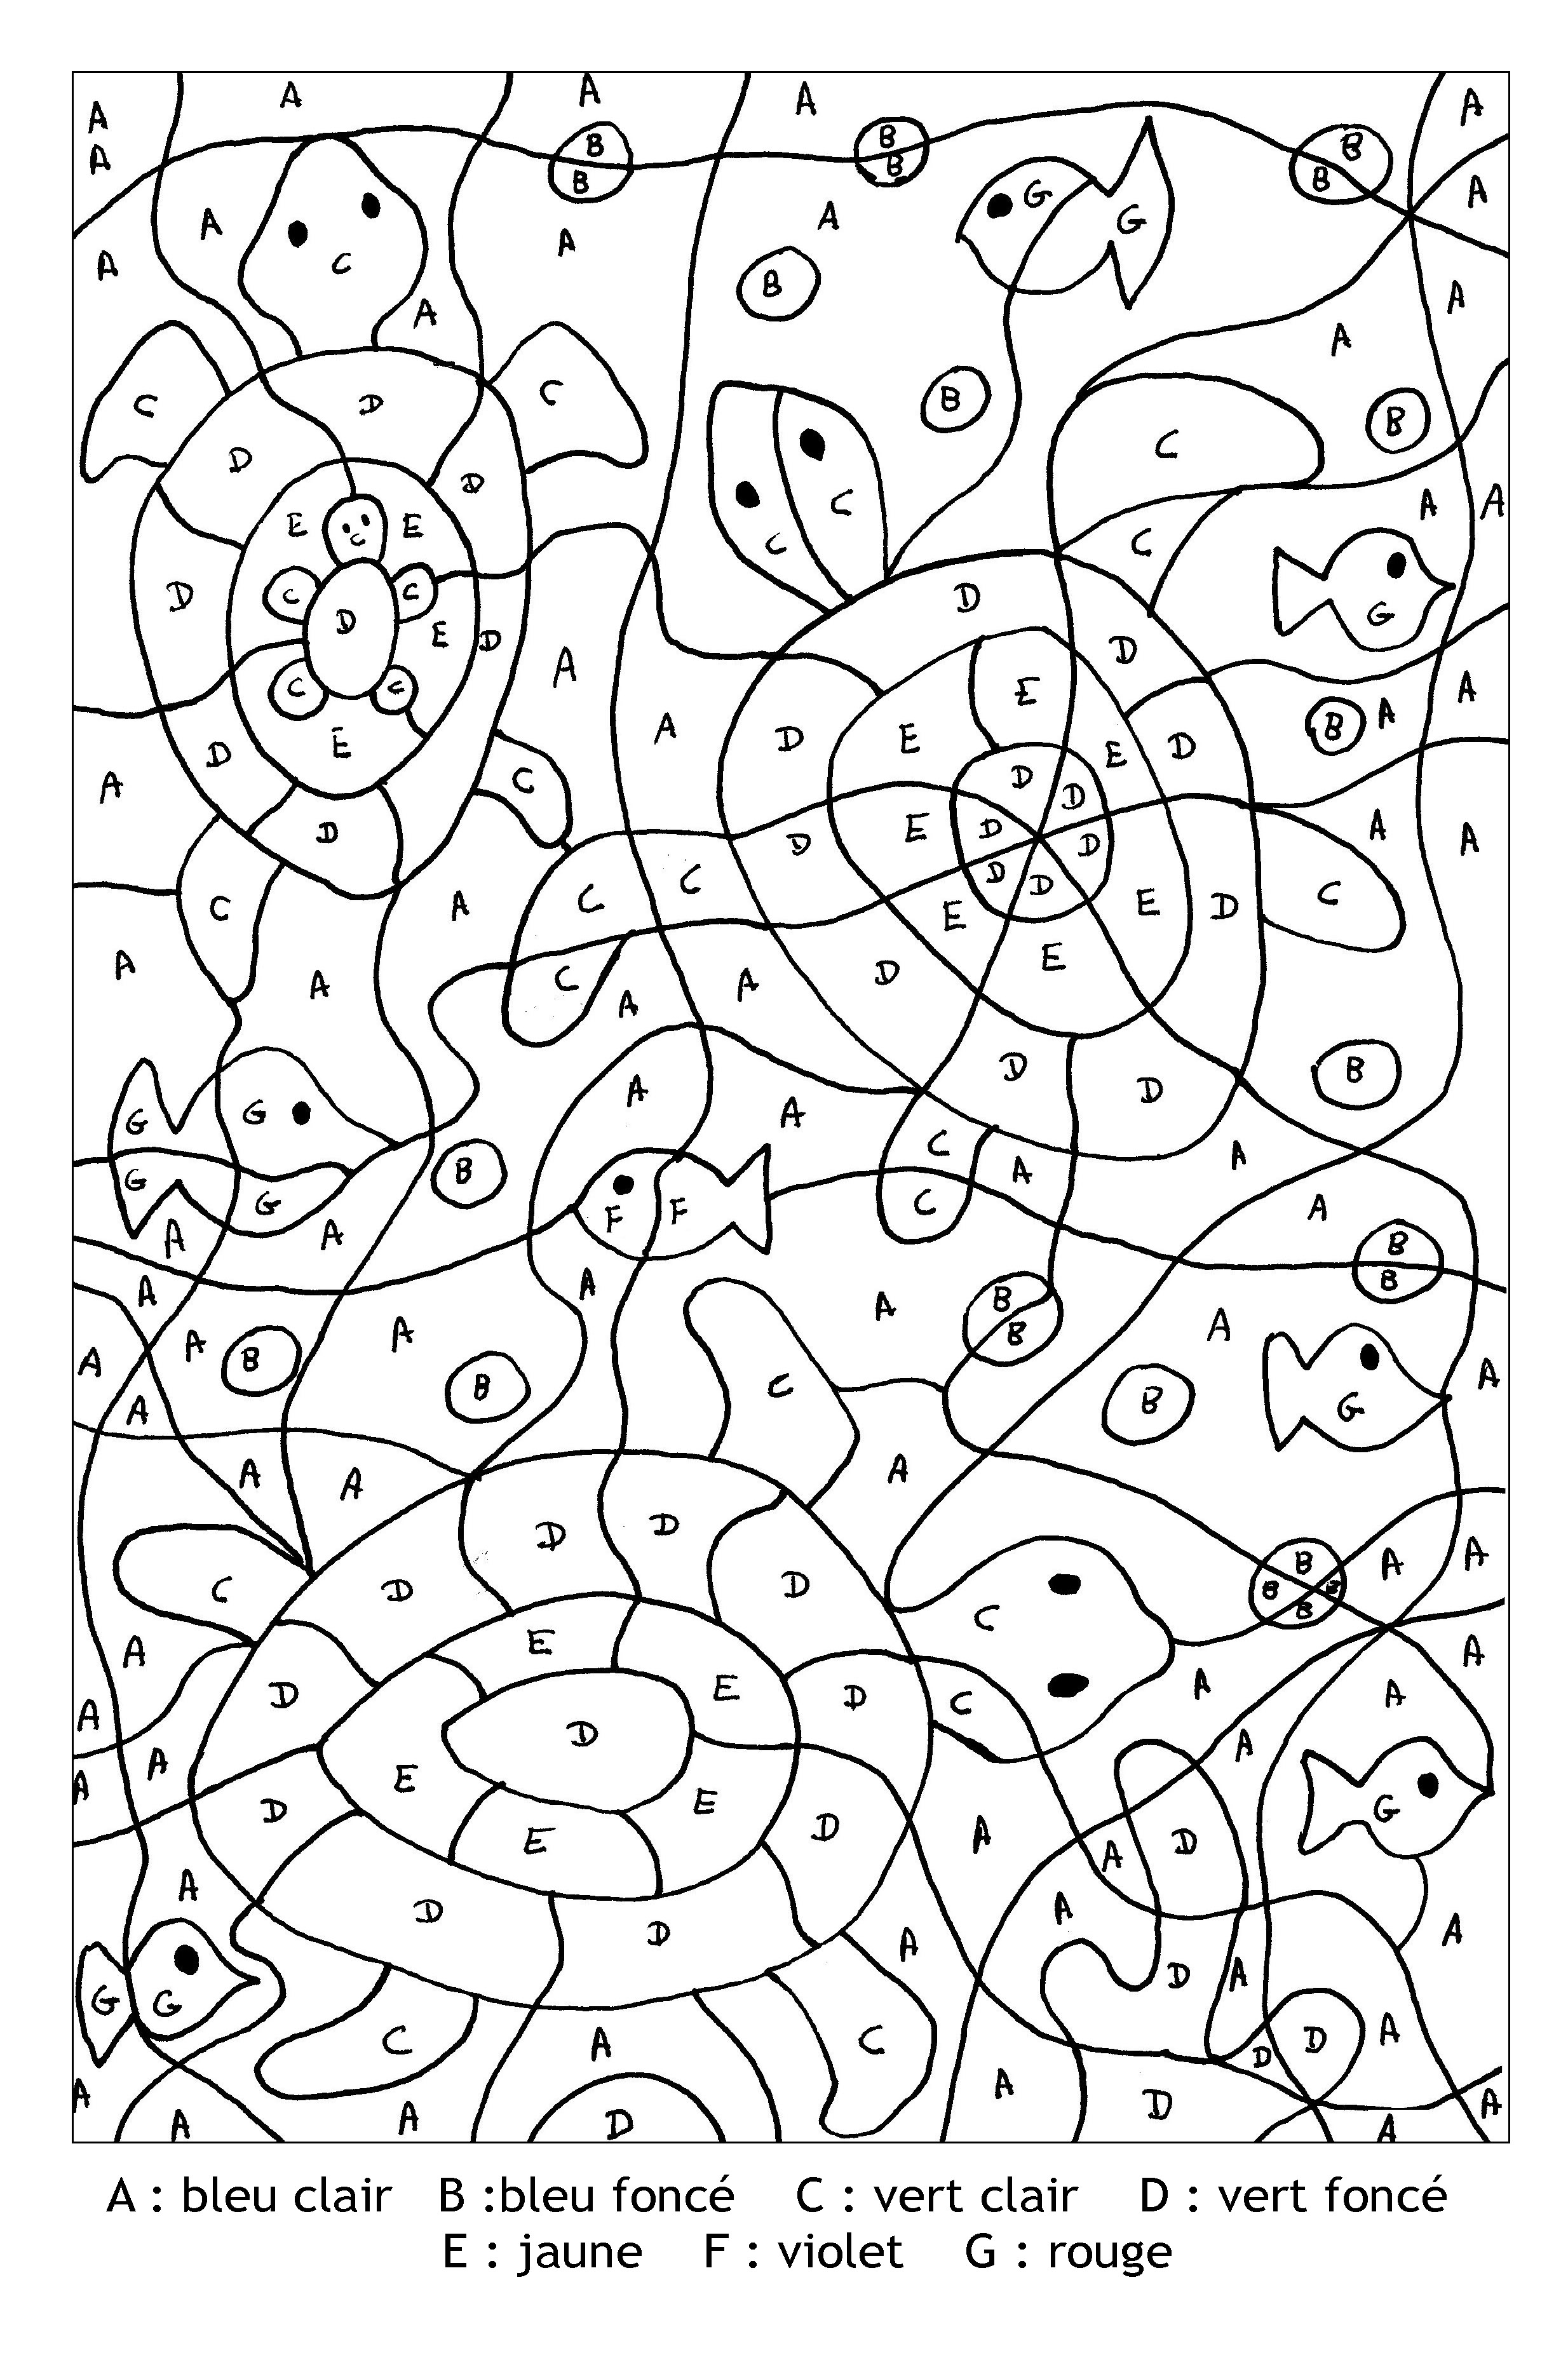 Magic to color for children : turtles - Magic Coloring Kids Coloring Pages